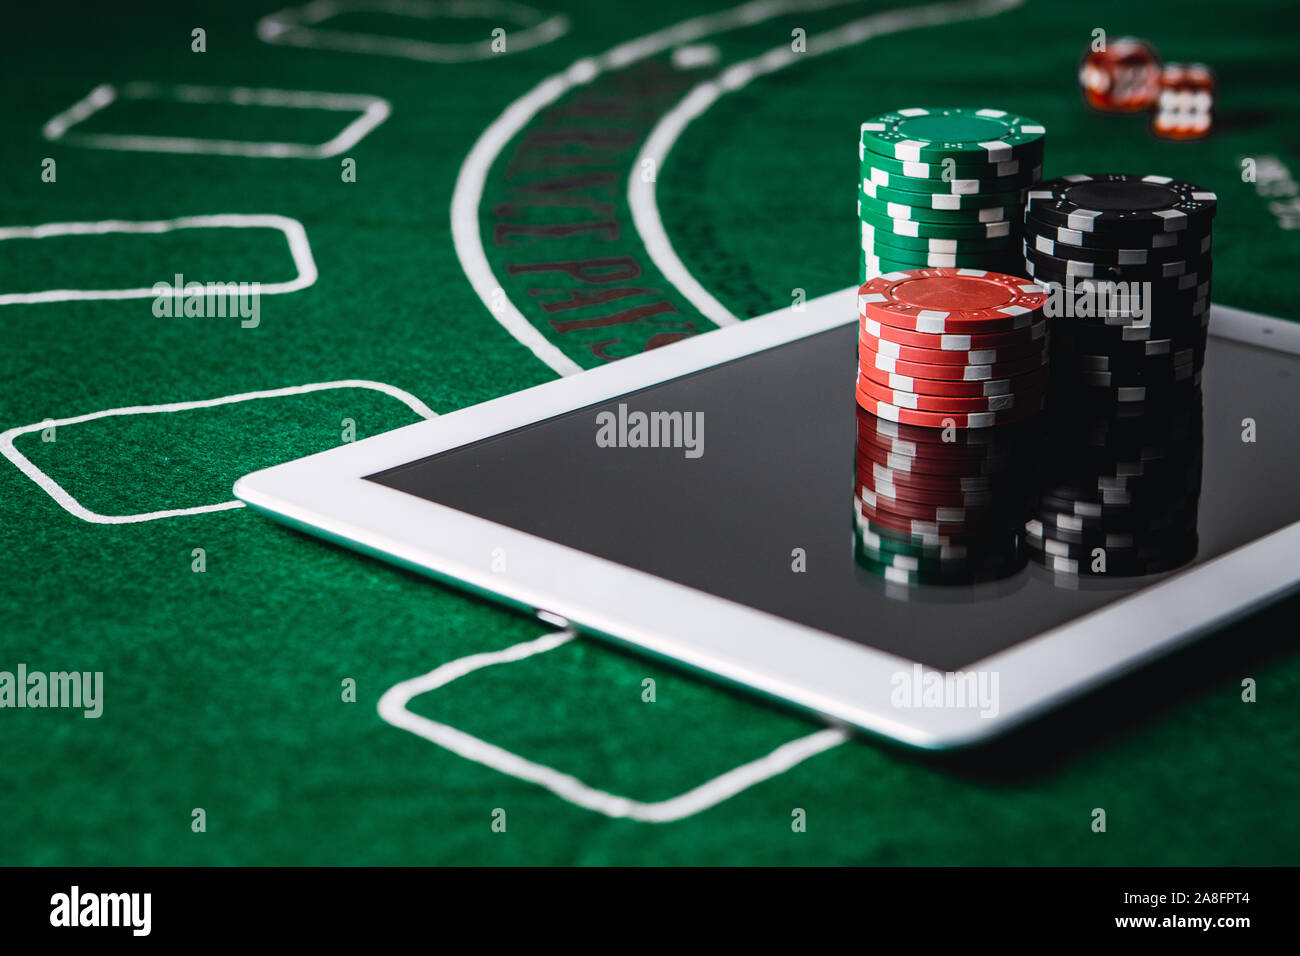 Casino online concept. Betting and gambling online idea. Play poker on internet Stock Photo